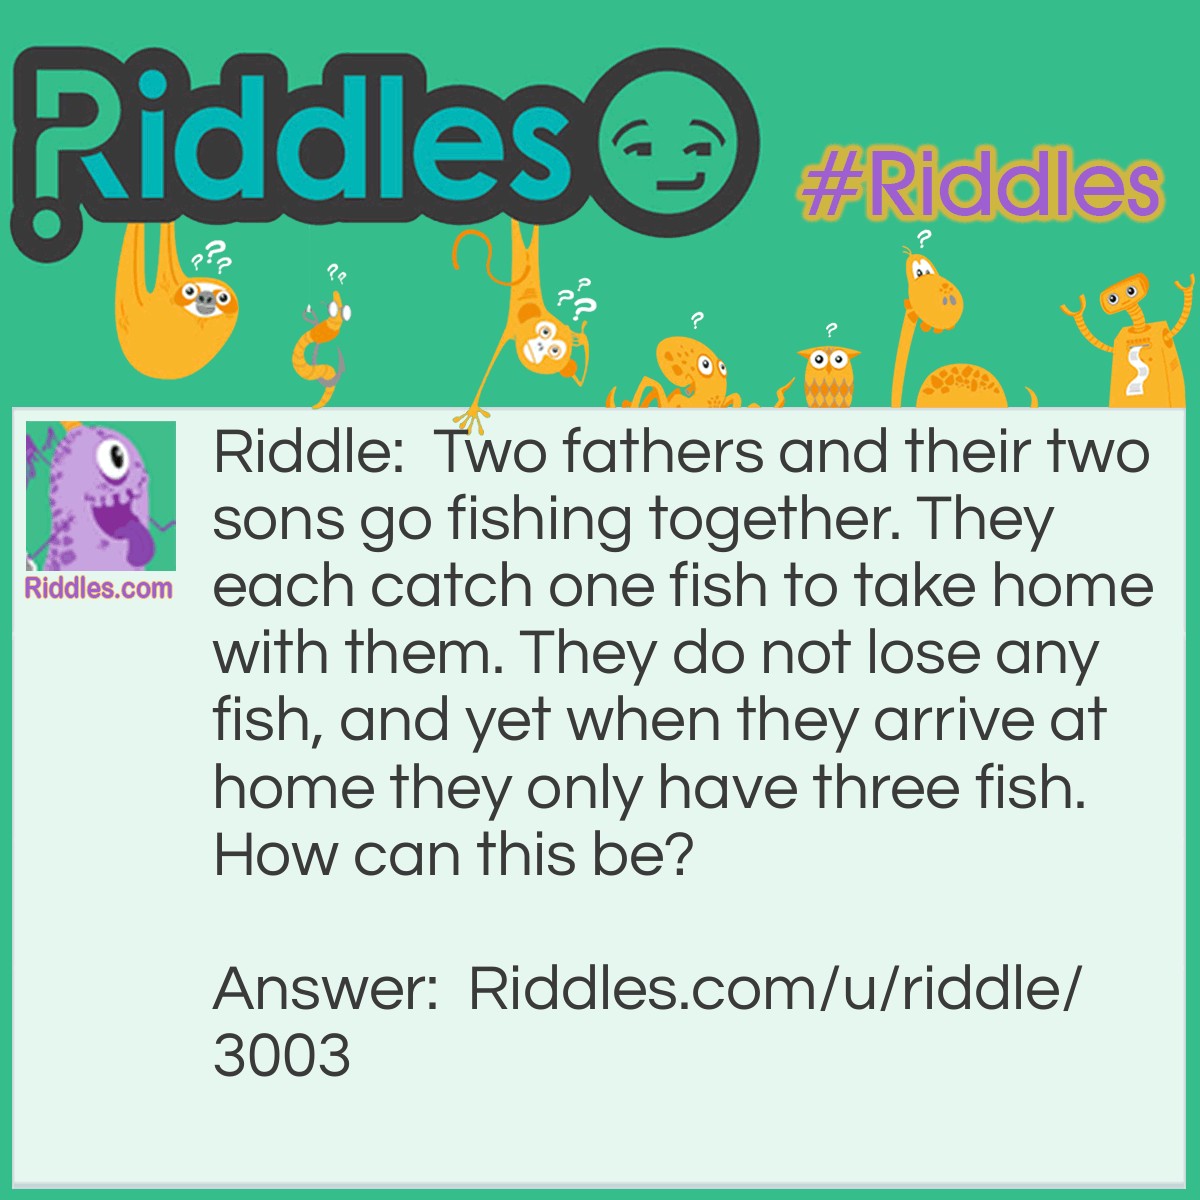 Riddle: Two fathers and their two sons go fishing together. They each catch one fish to take home with them. They do not lose any fish, and yet when they arrive at home they only have three fish. How can this be? Answer: There are just three people. A grandfather, his son, and his grandson.